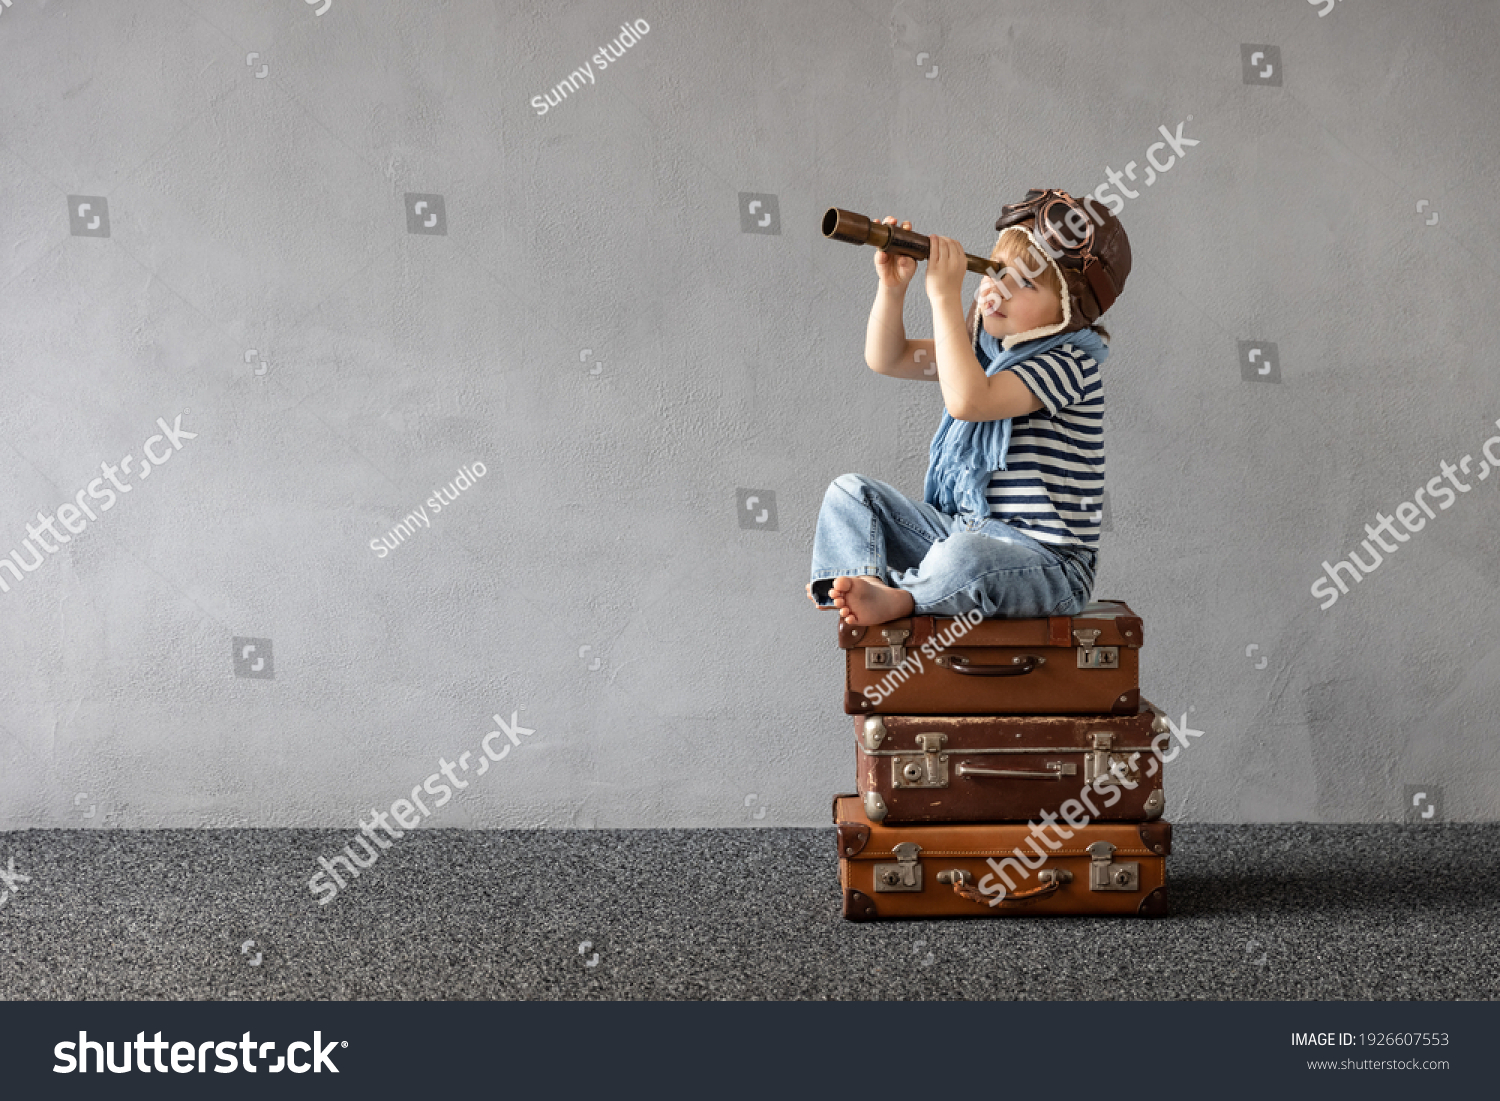 Happy child playing outdoor. Smiling kid dreaming about summer vacation and travel. Imagination and freedom concept #1926607553